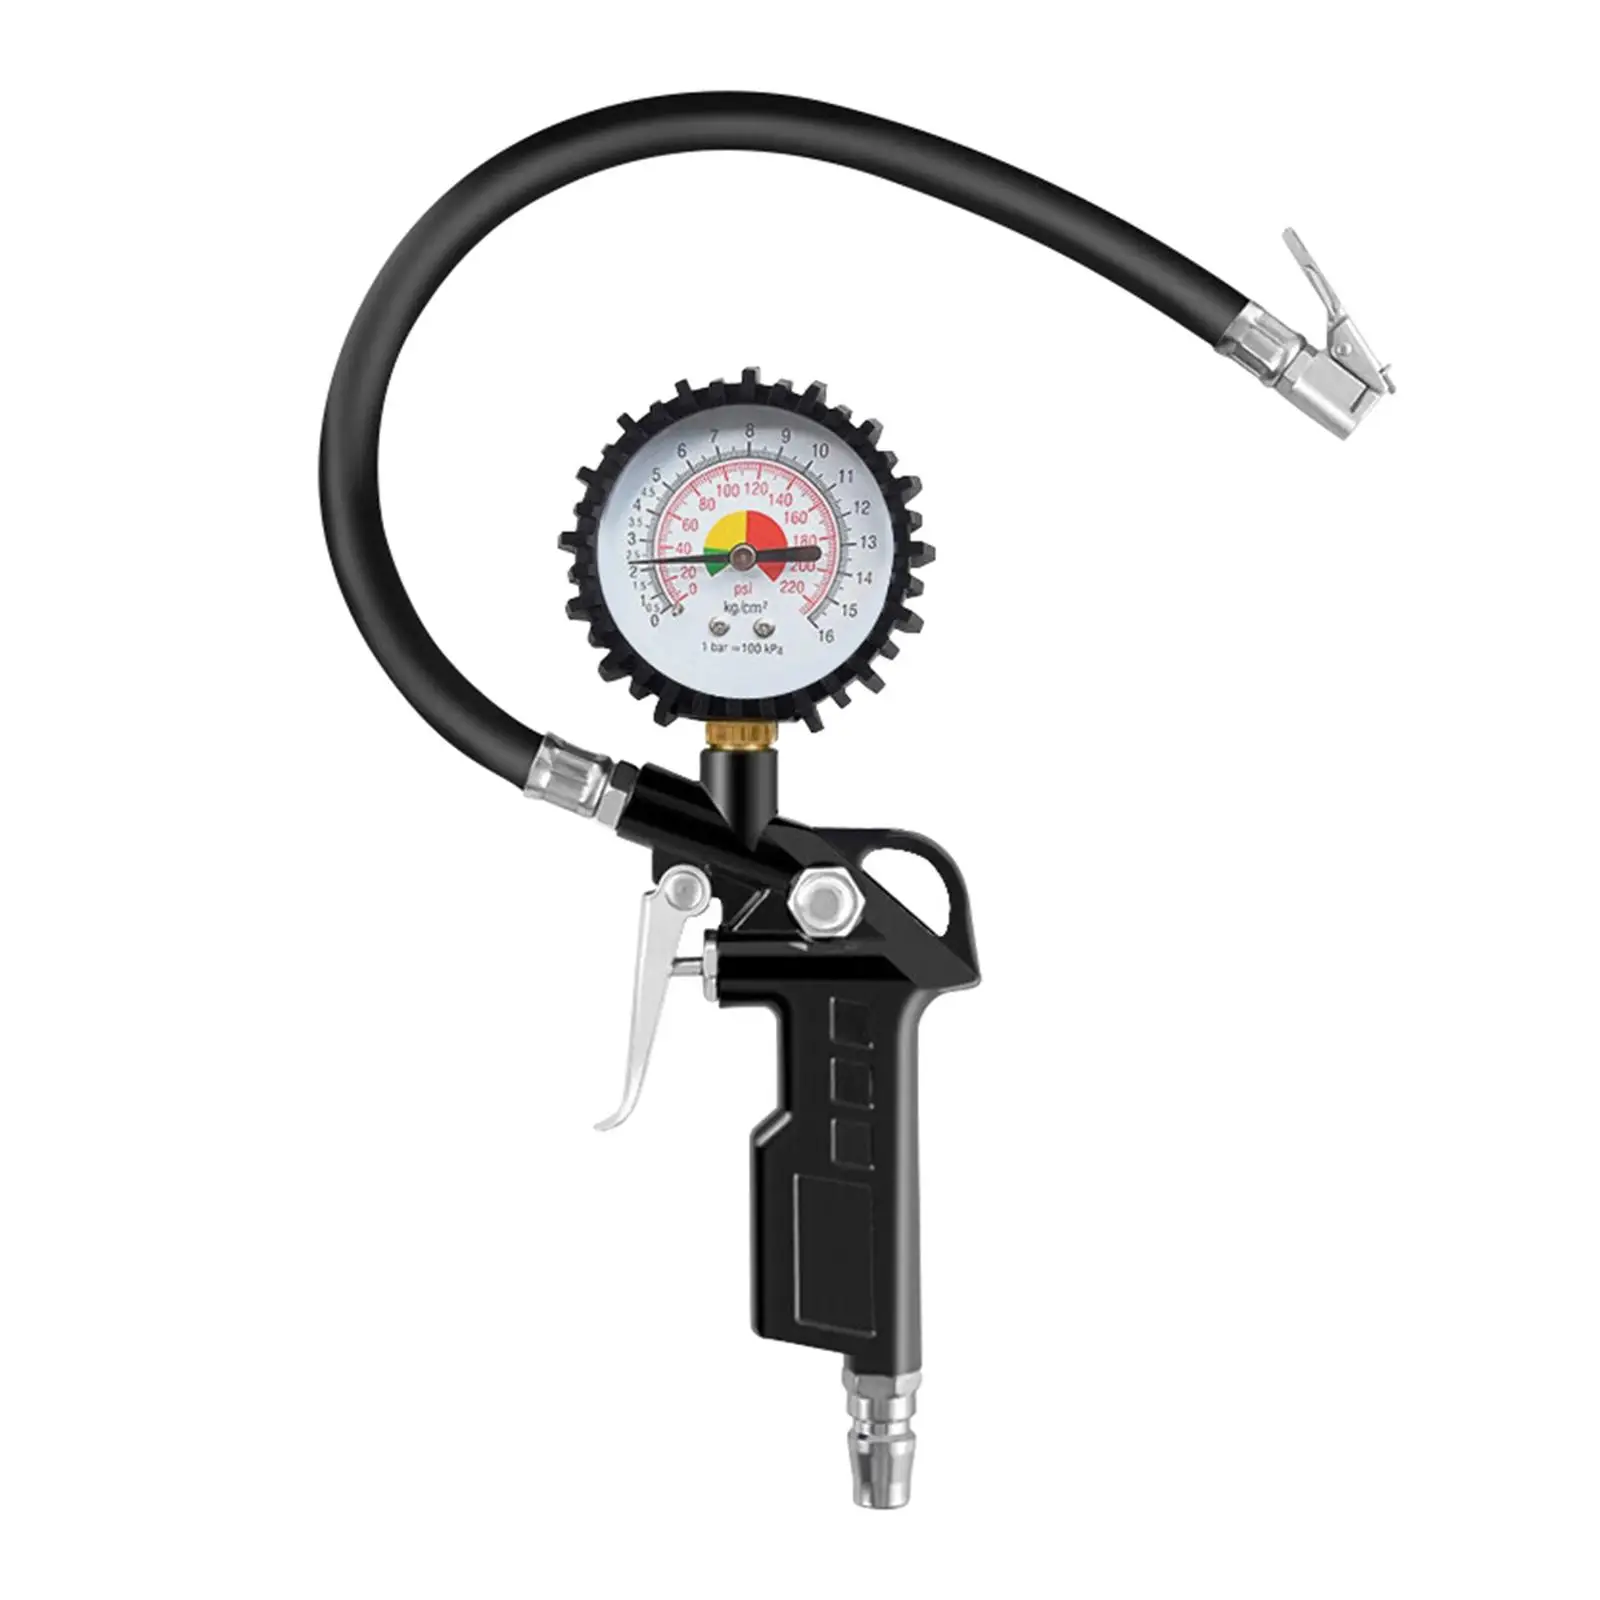 Tire Pressure Gauge Handheld High Precision 0-220PSI for Motorcycle